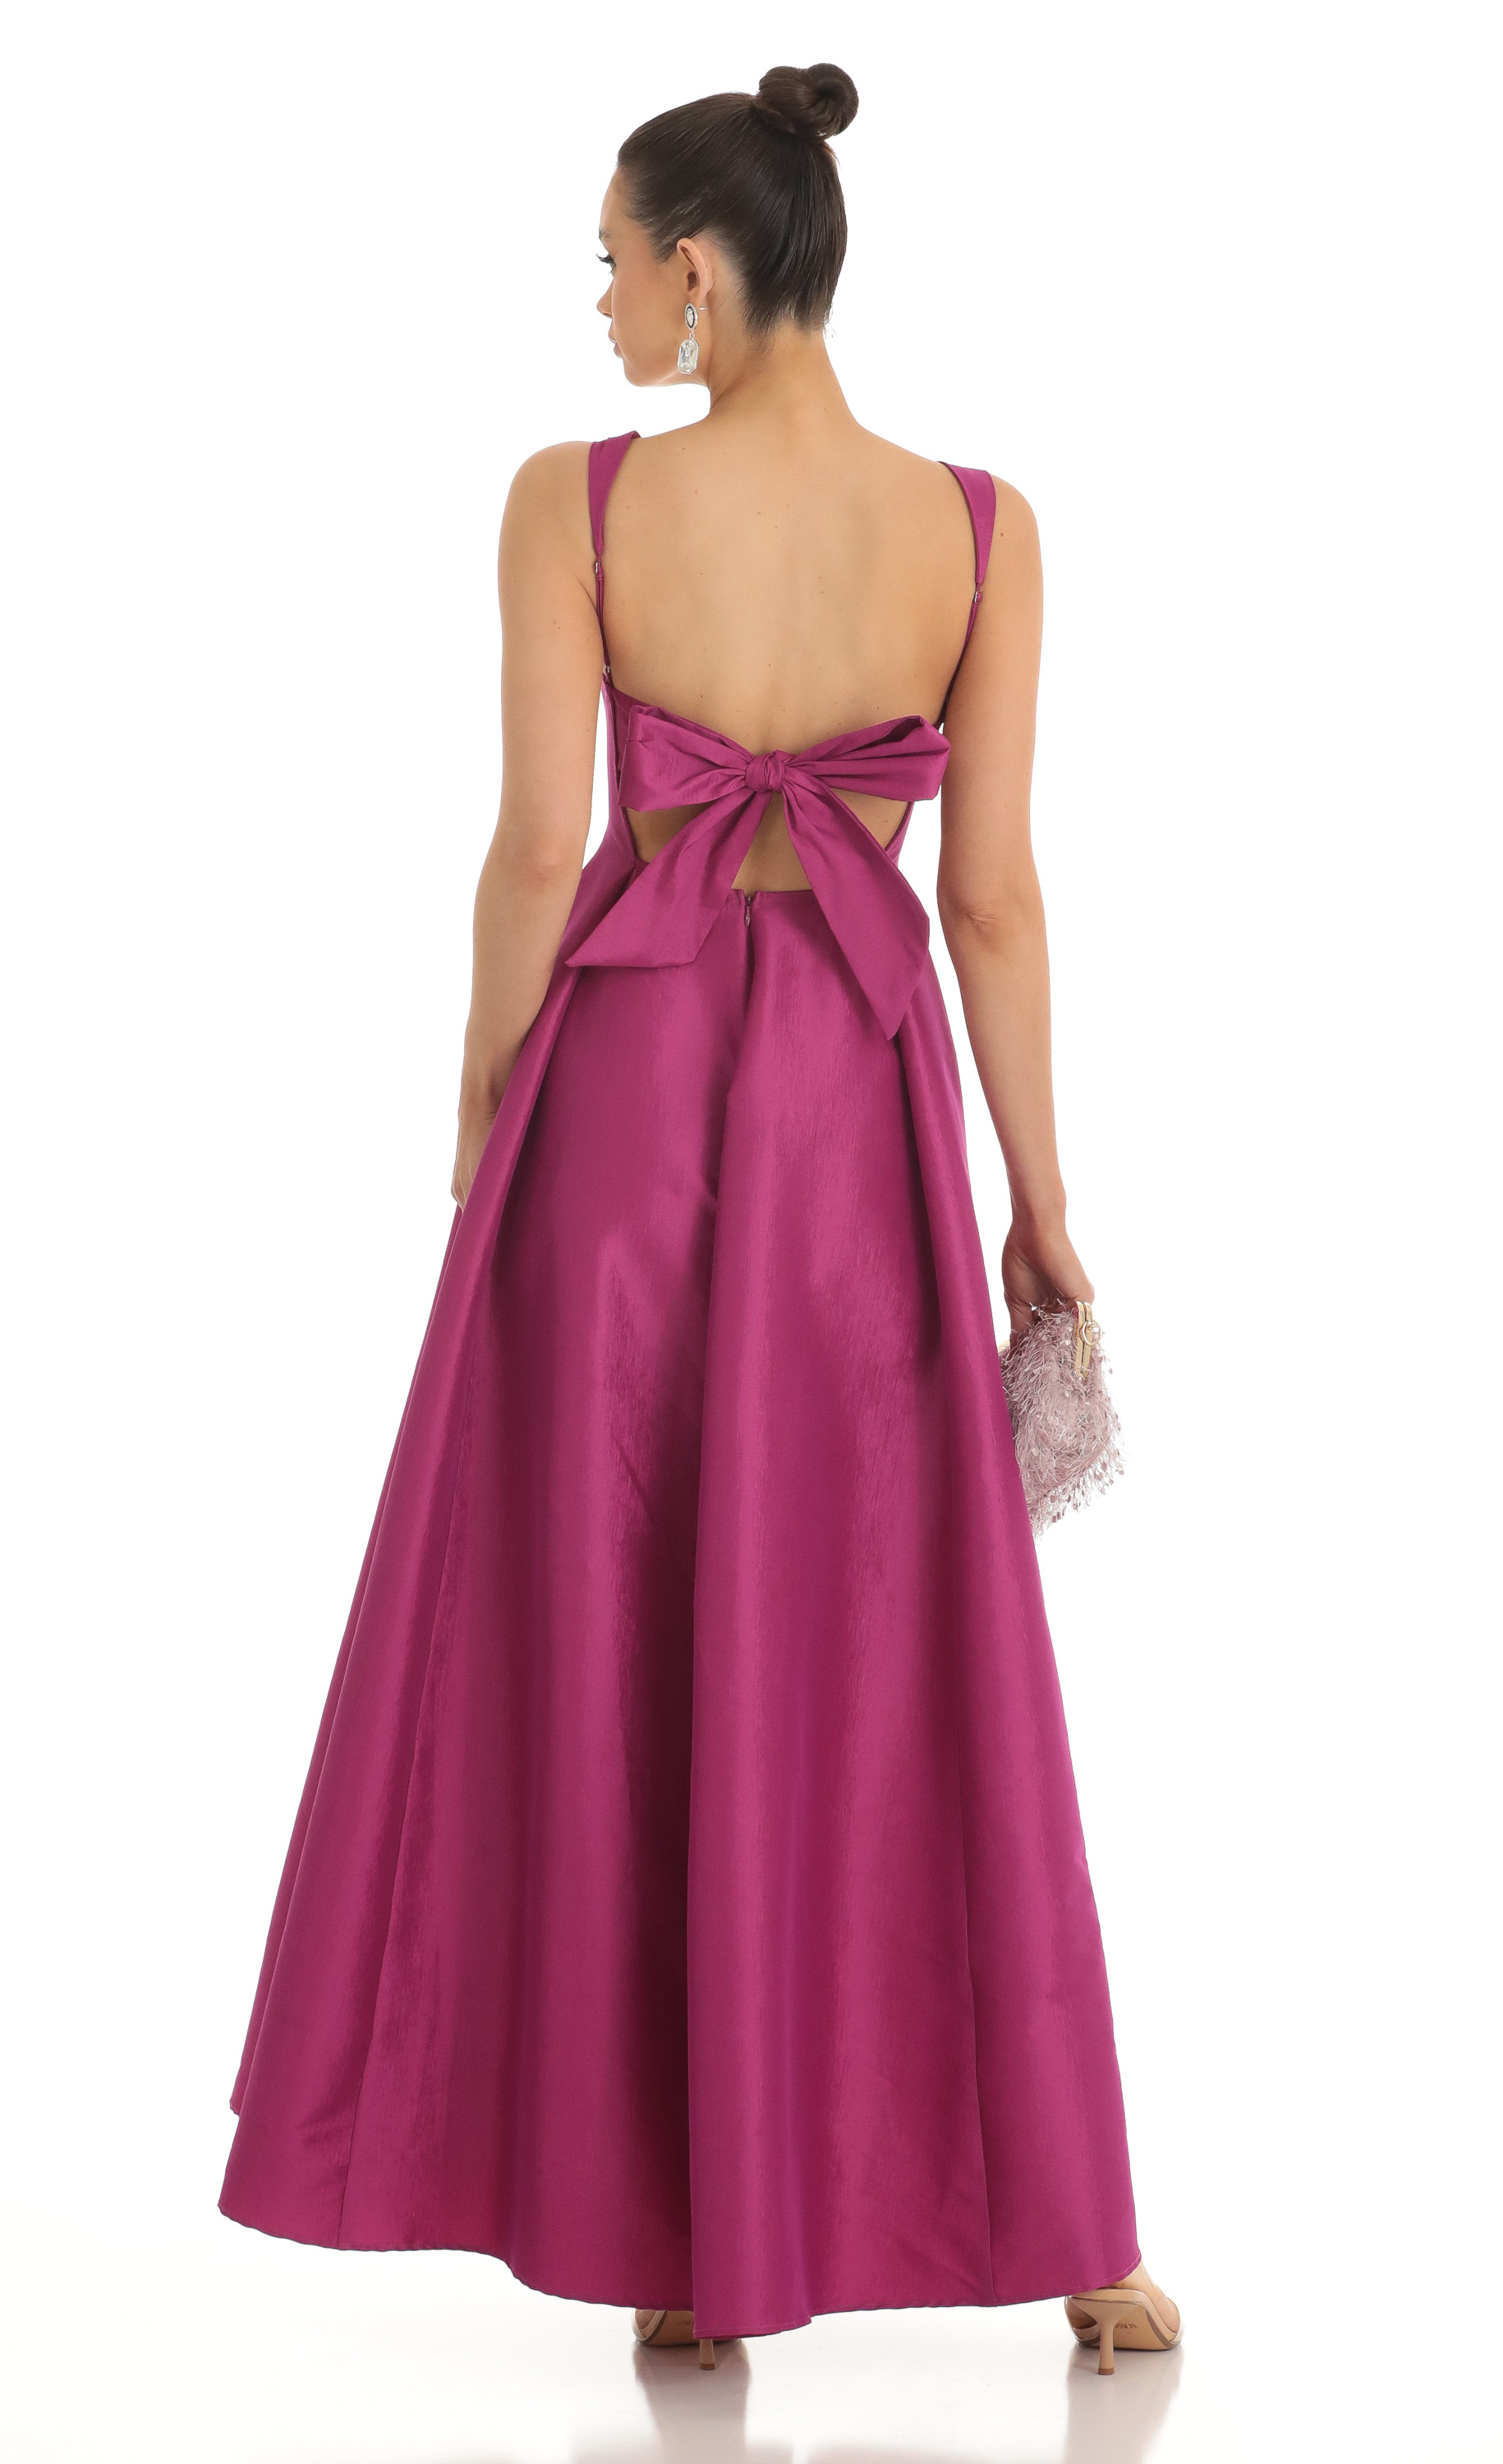 Fit and Flare Maxi Dress in Dark Pink